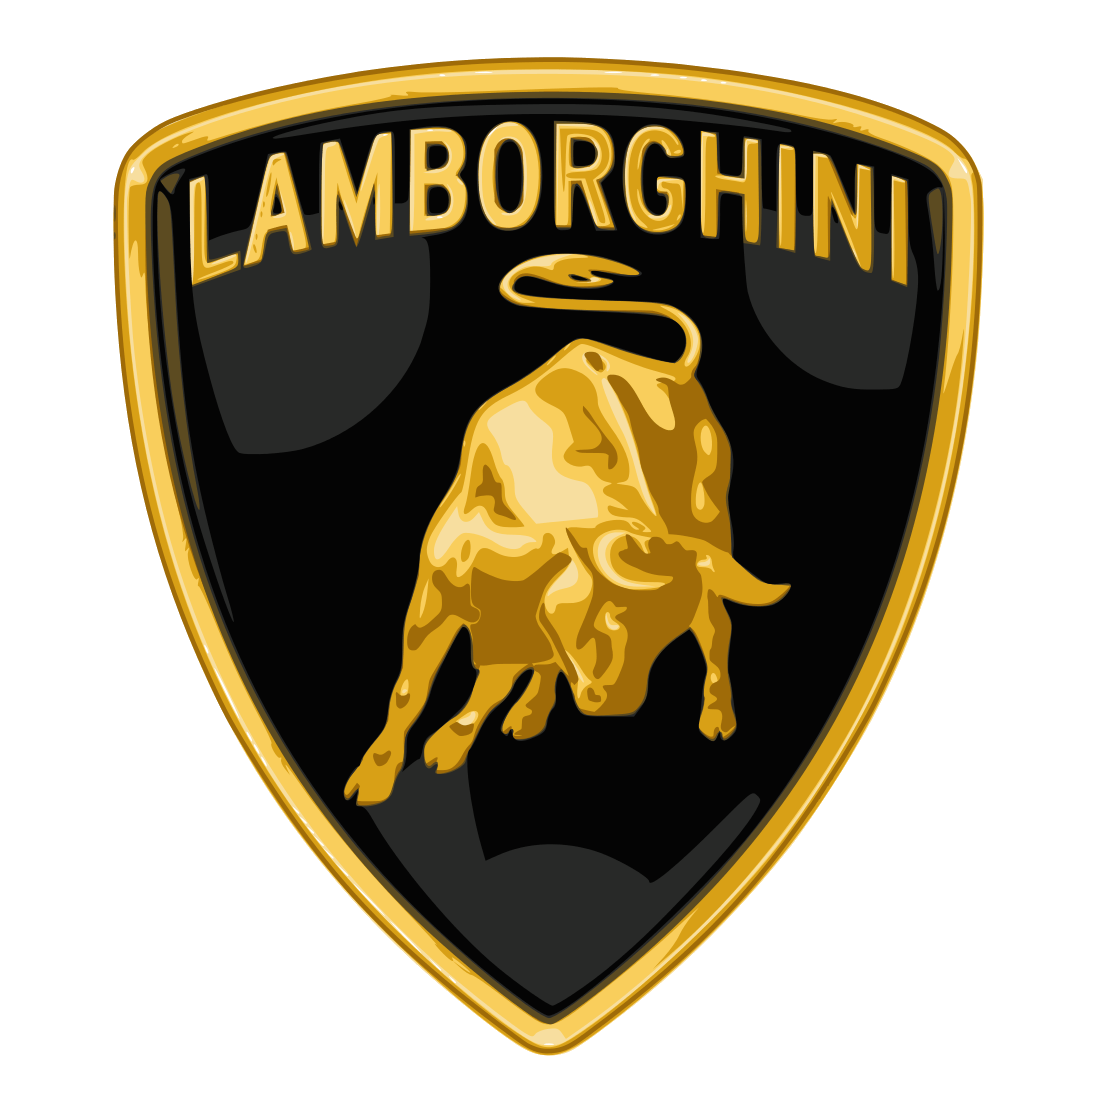 Lamborghani Logo - Lamborghini Logo, Lamborghini Car Symbol Meaning and History. Car